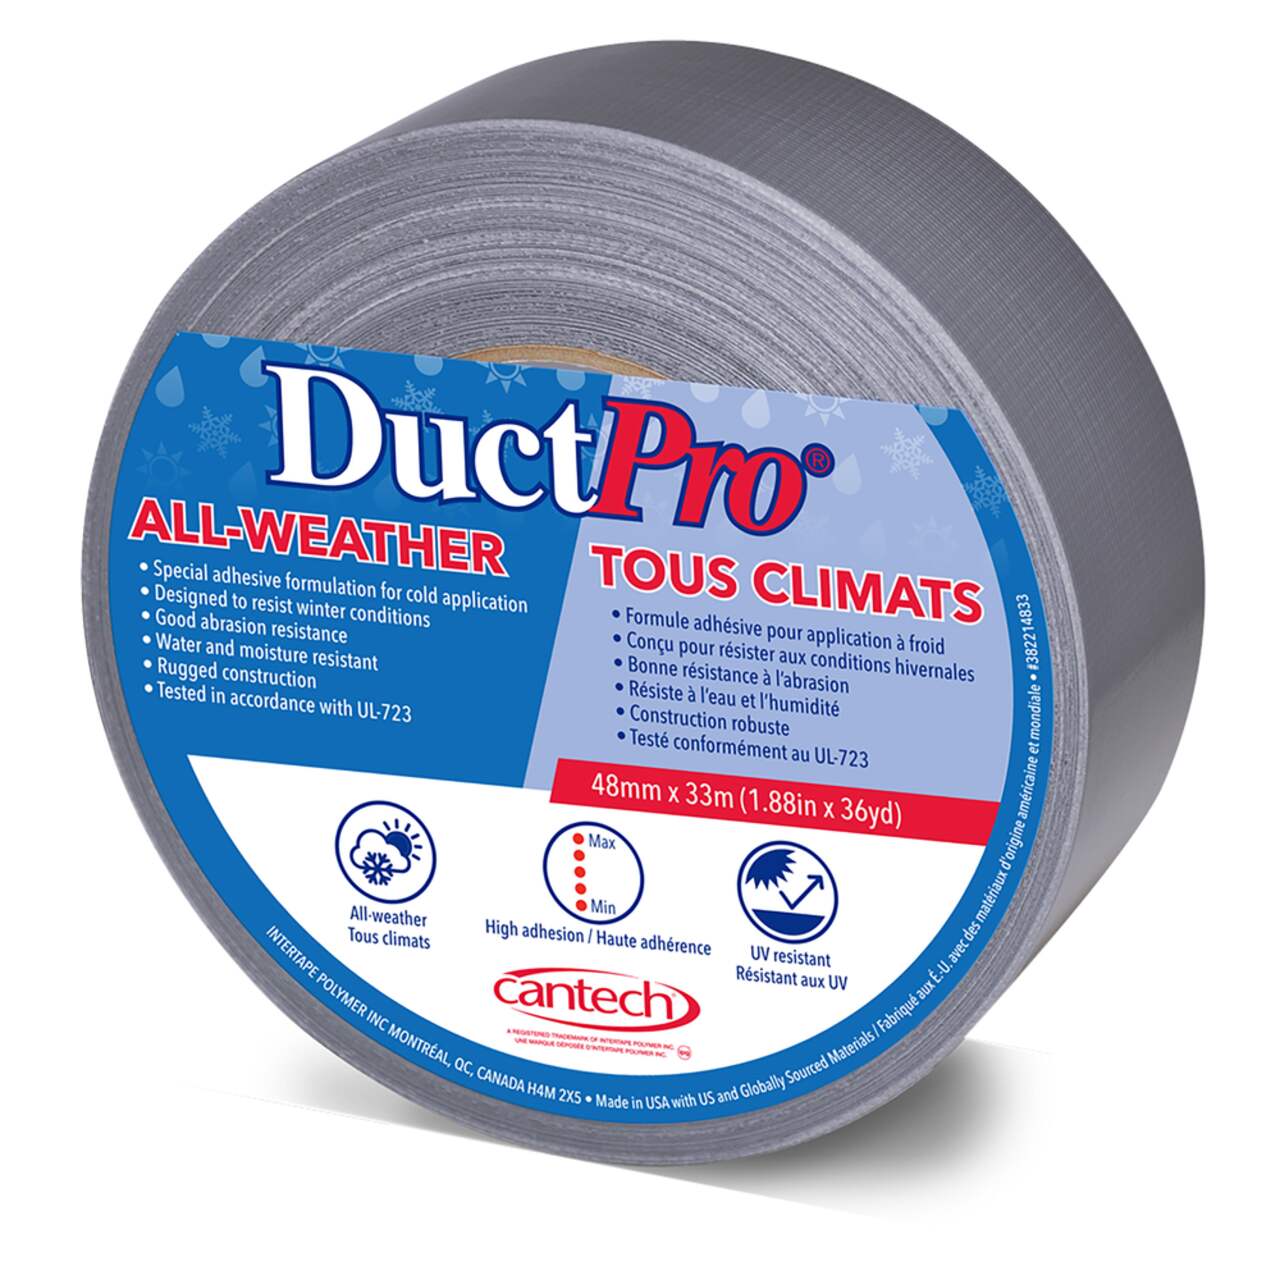 https://media-www.canadiantire.ca/product/fixing/paint/surface-prep-maintenance/0676014/snow-ice-duct-tape-66e07fbc-2fe0-40f9-b917-88a9f9e361f7.png?imdensity=1&imwidth=640&impolicy=mZoom